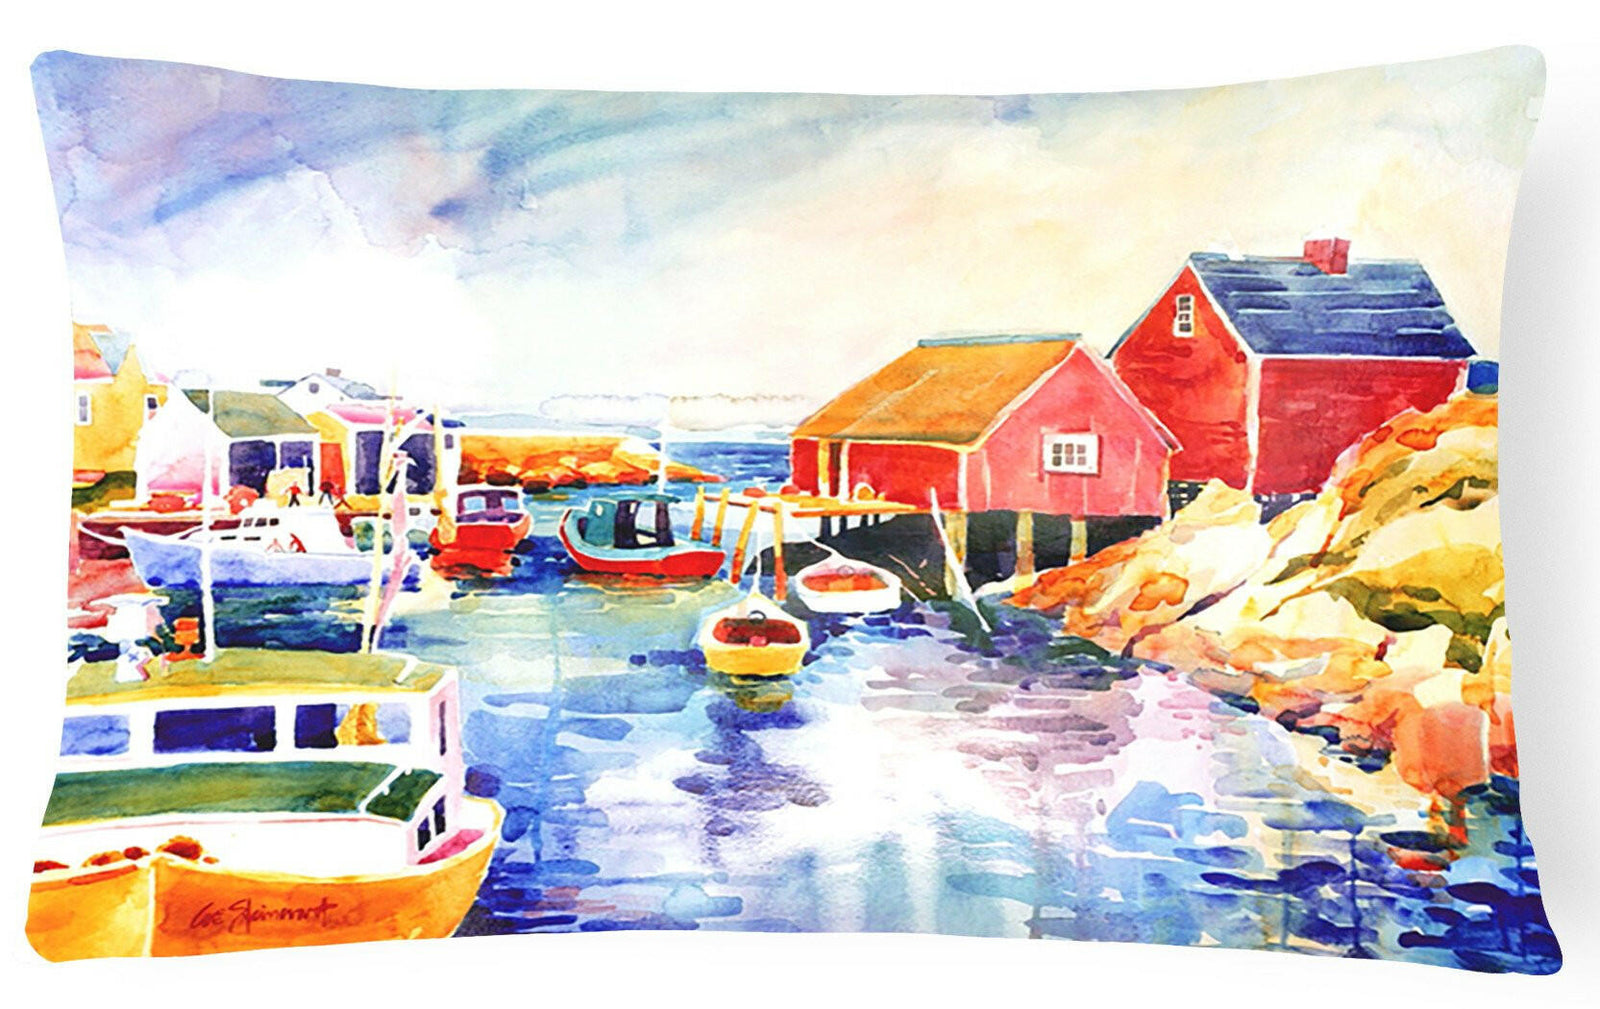 Boats at Harbour with a view Decorative   Canvas Fabric Pillow by Caroline's Treasures